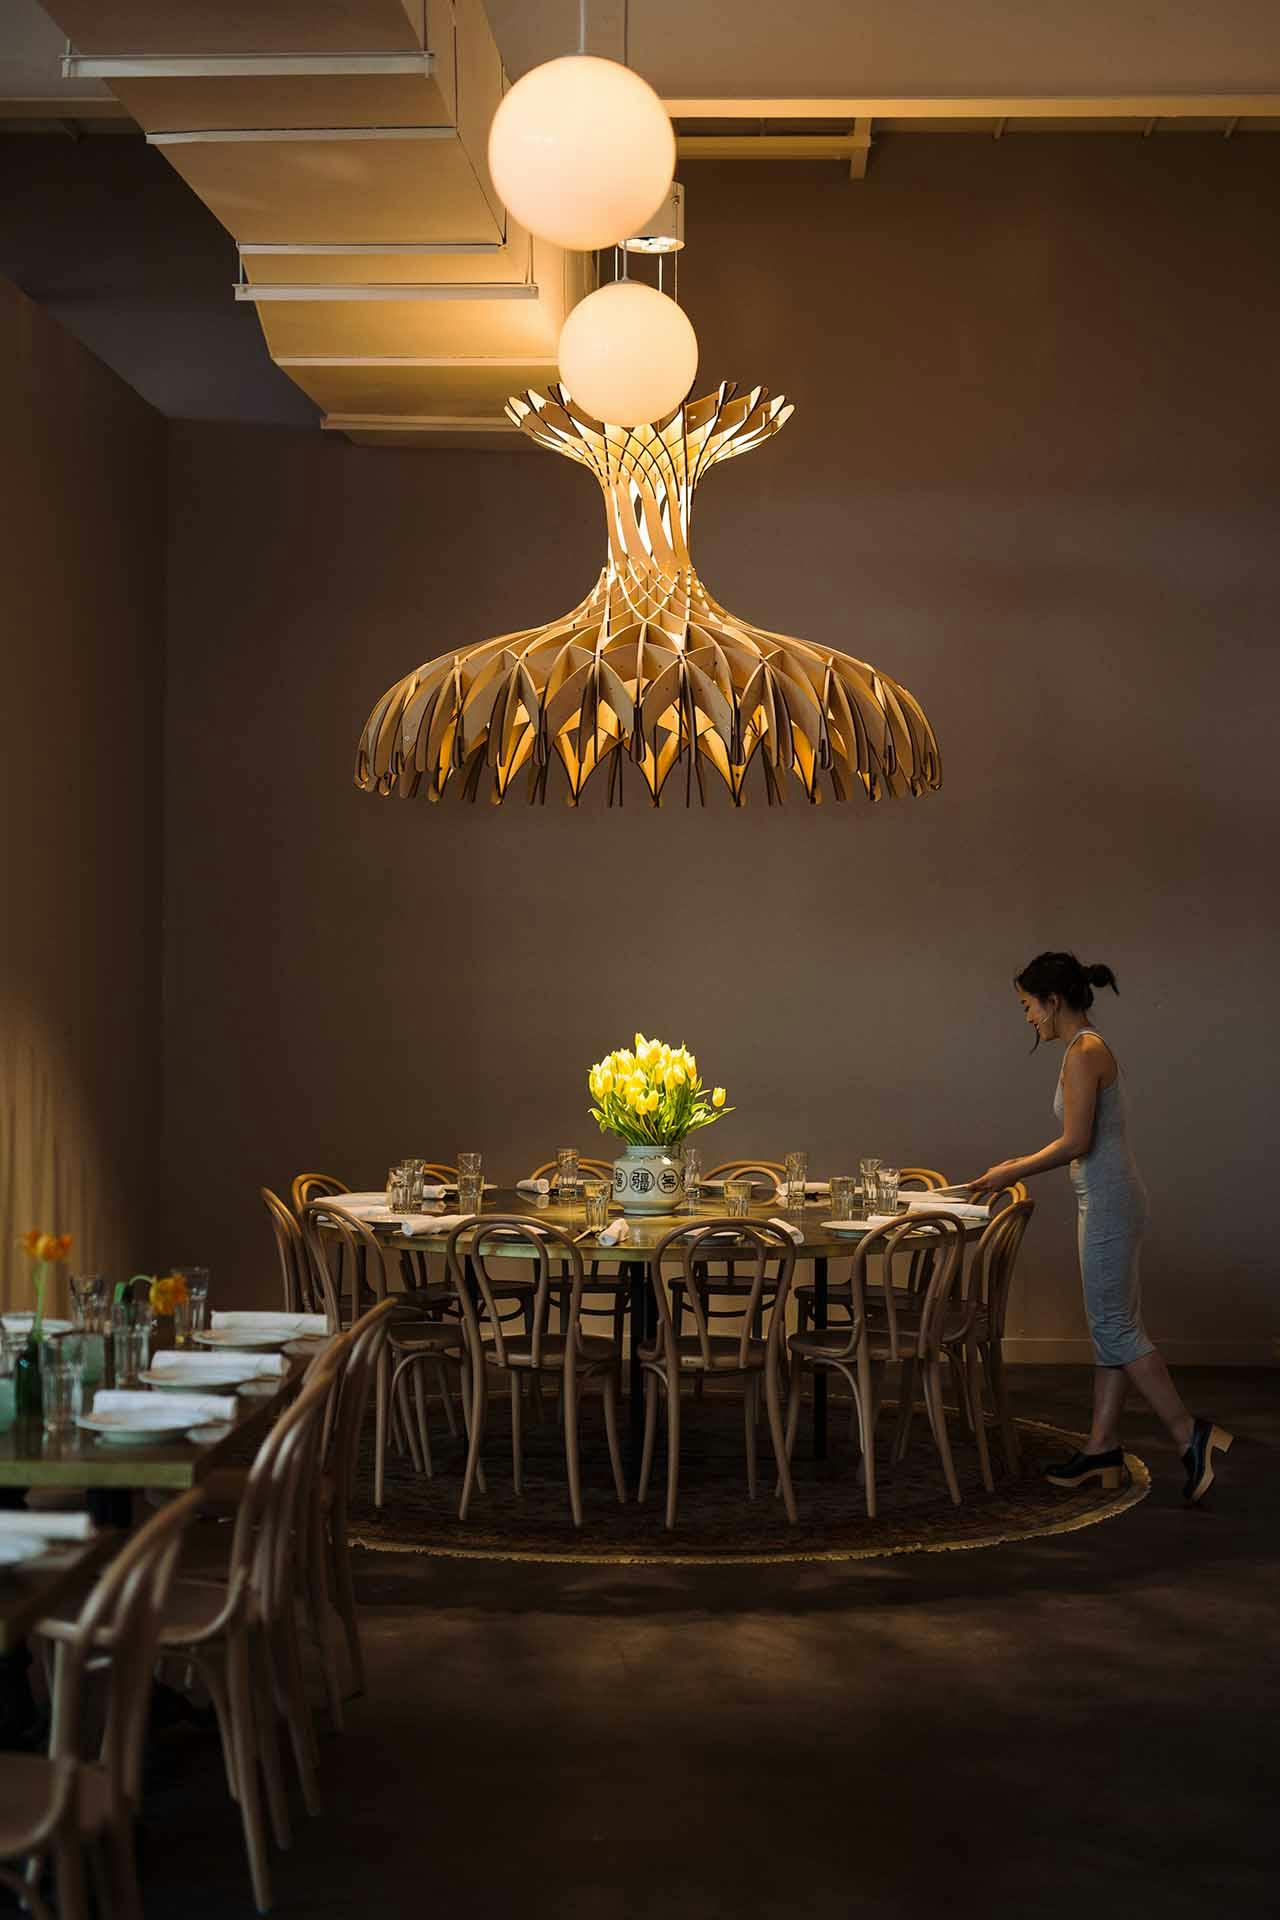 a woman sets a round table under an intricate wooden light fixture